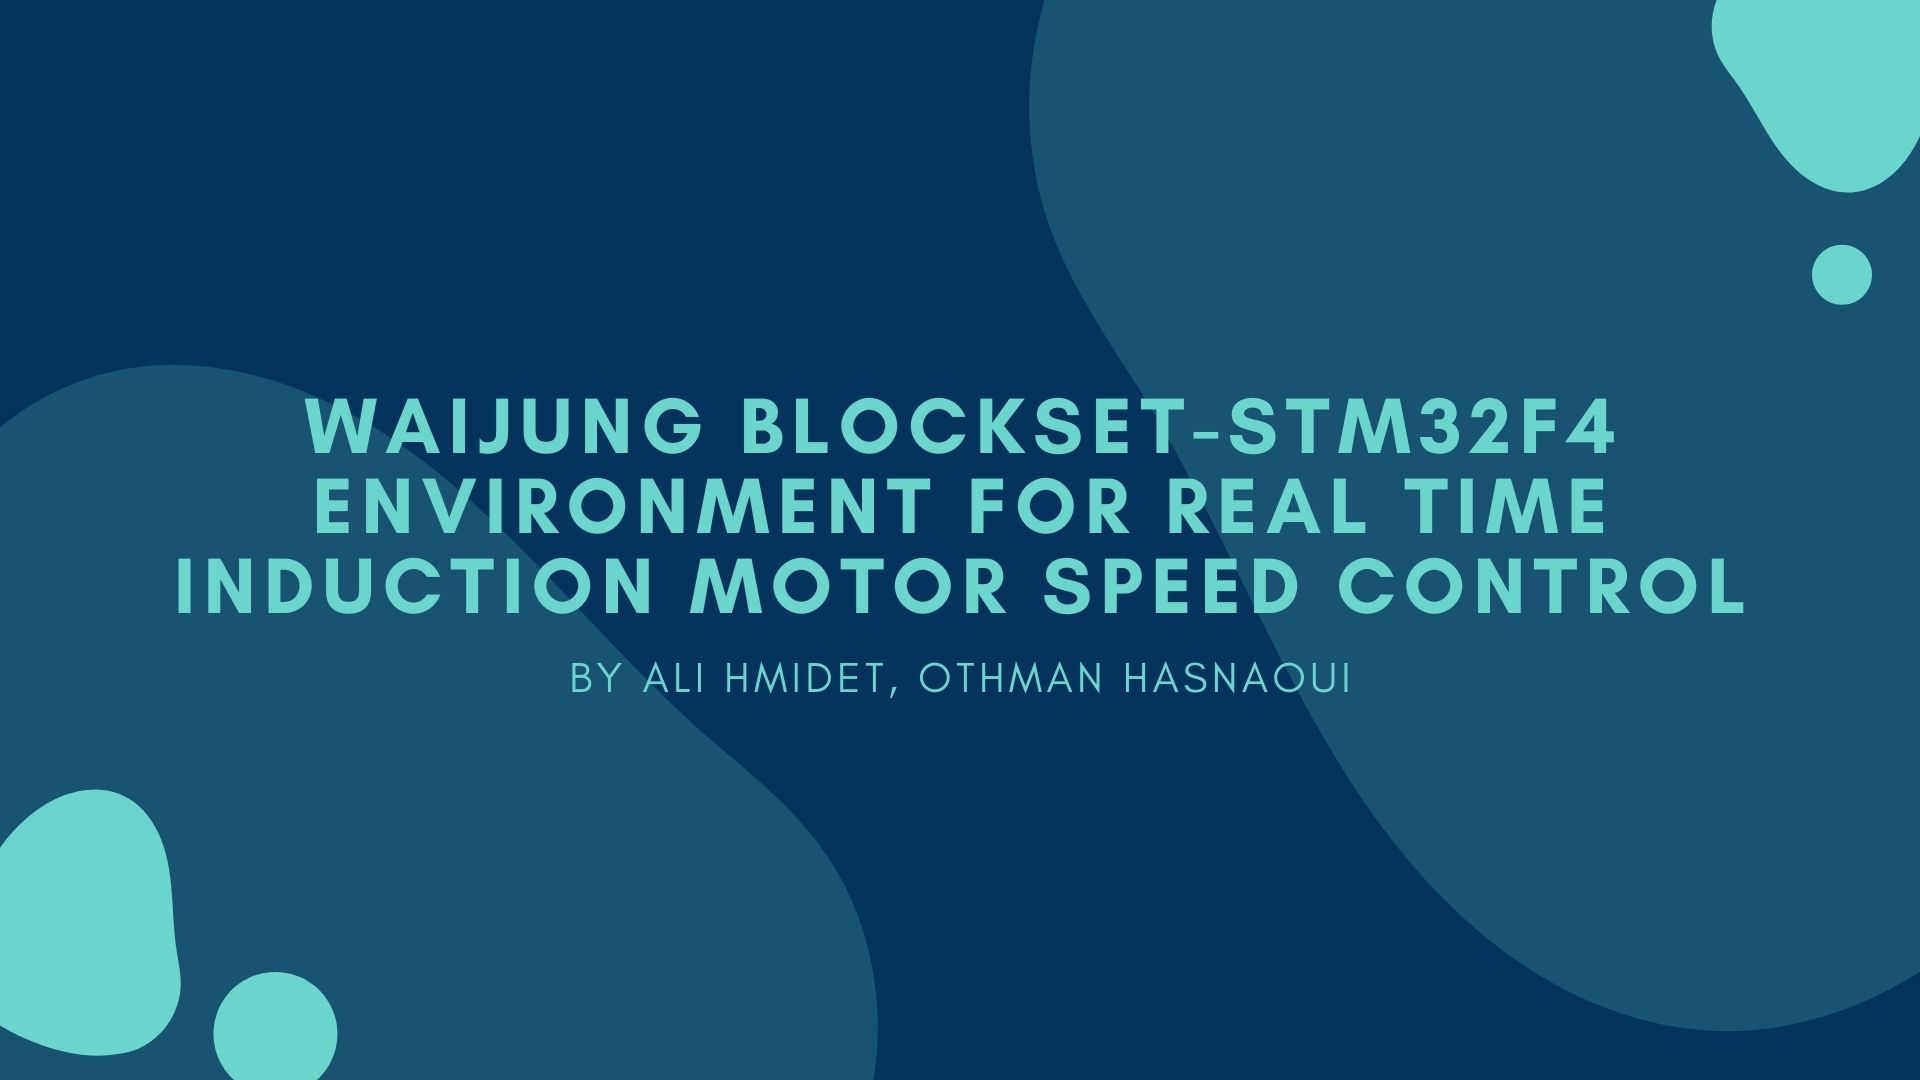 Waijung Blockset-STM32F4 Environment for Real Time Induction Motor Speed Control